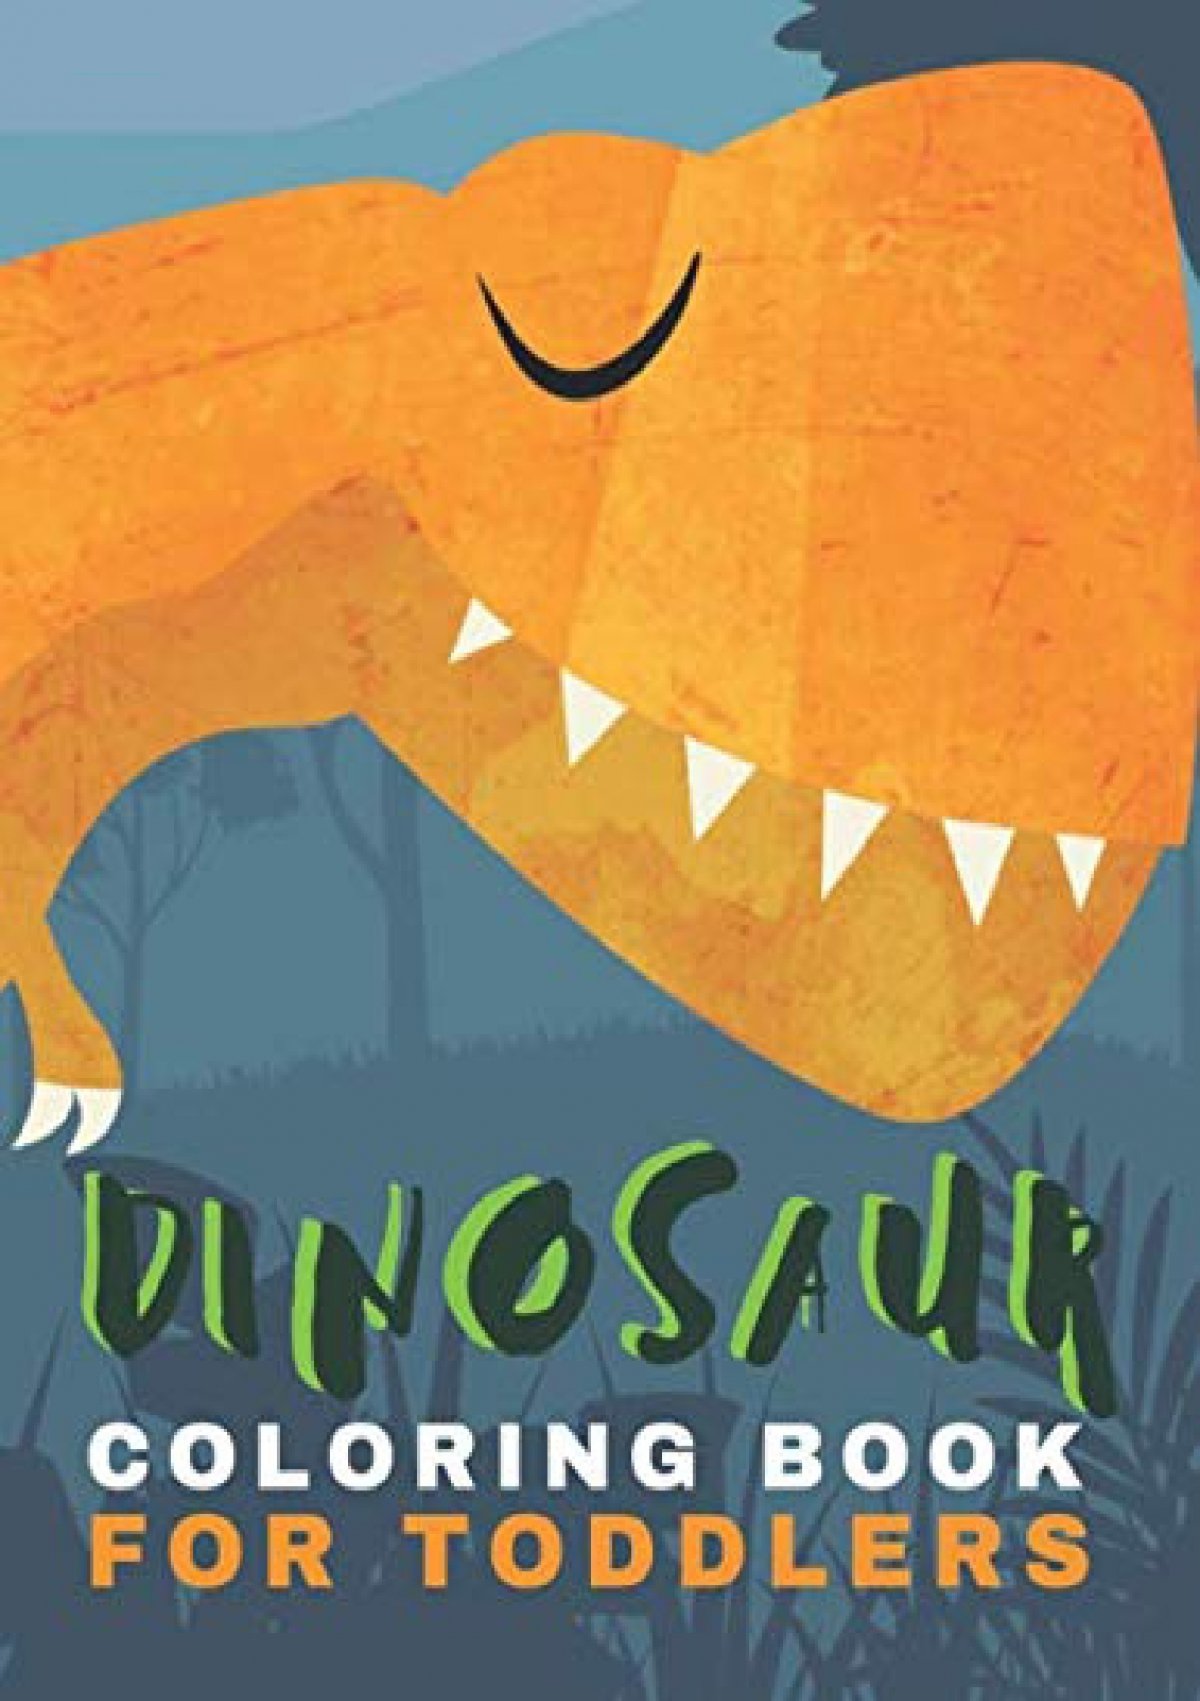 Download Pdf Dinosaur Coloring Book For Toddlers Dino Coloring Book For Kids Ages 2 4 With Bonus Activities Kindle